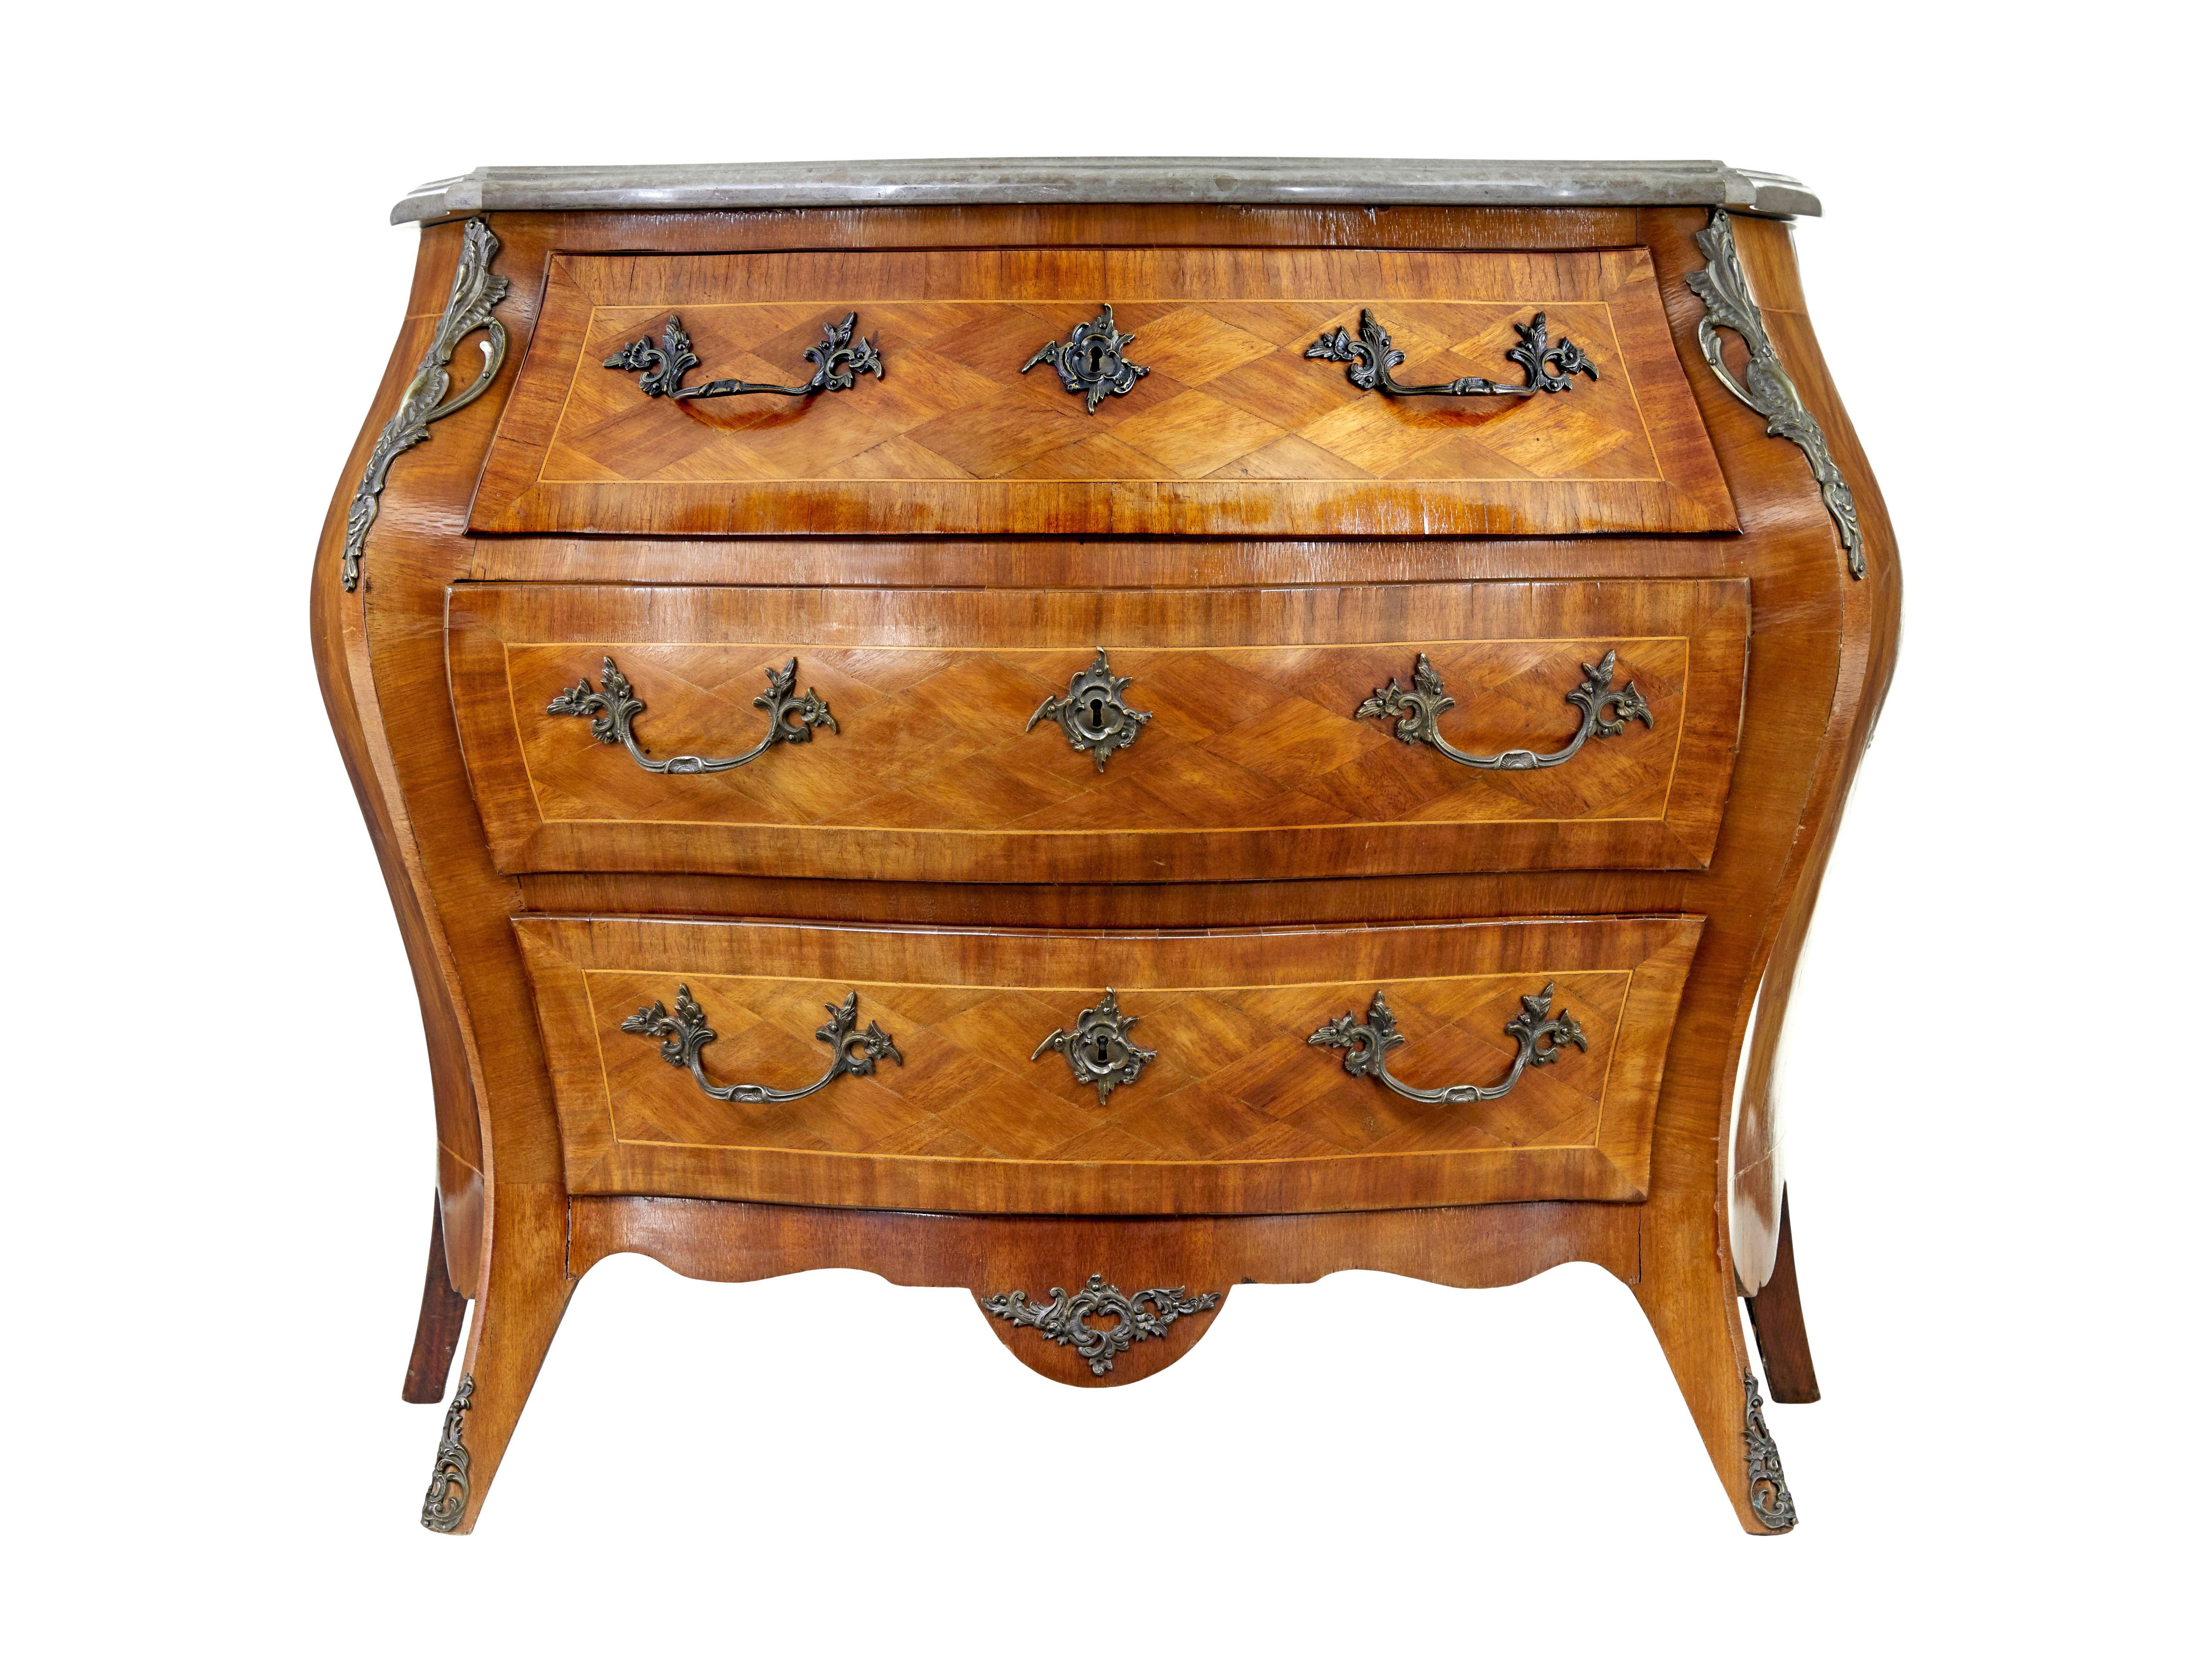 Mid century French walnut marble-top commode circa 1950.

Good quality french bombe shaped commode in the rococo taste.  3 drawers fitted with ornate handles and key plates. Parquet arranged drawer fronts and sides and stringing. Grey marble top